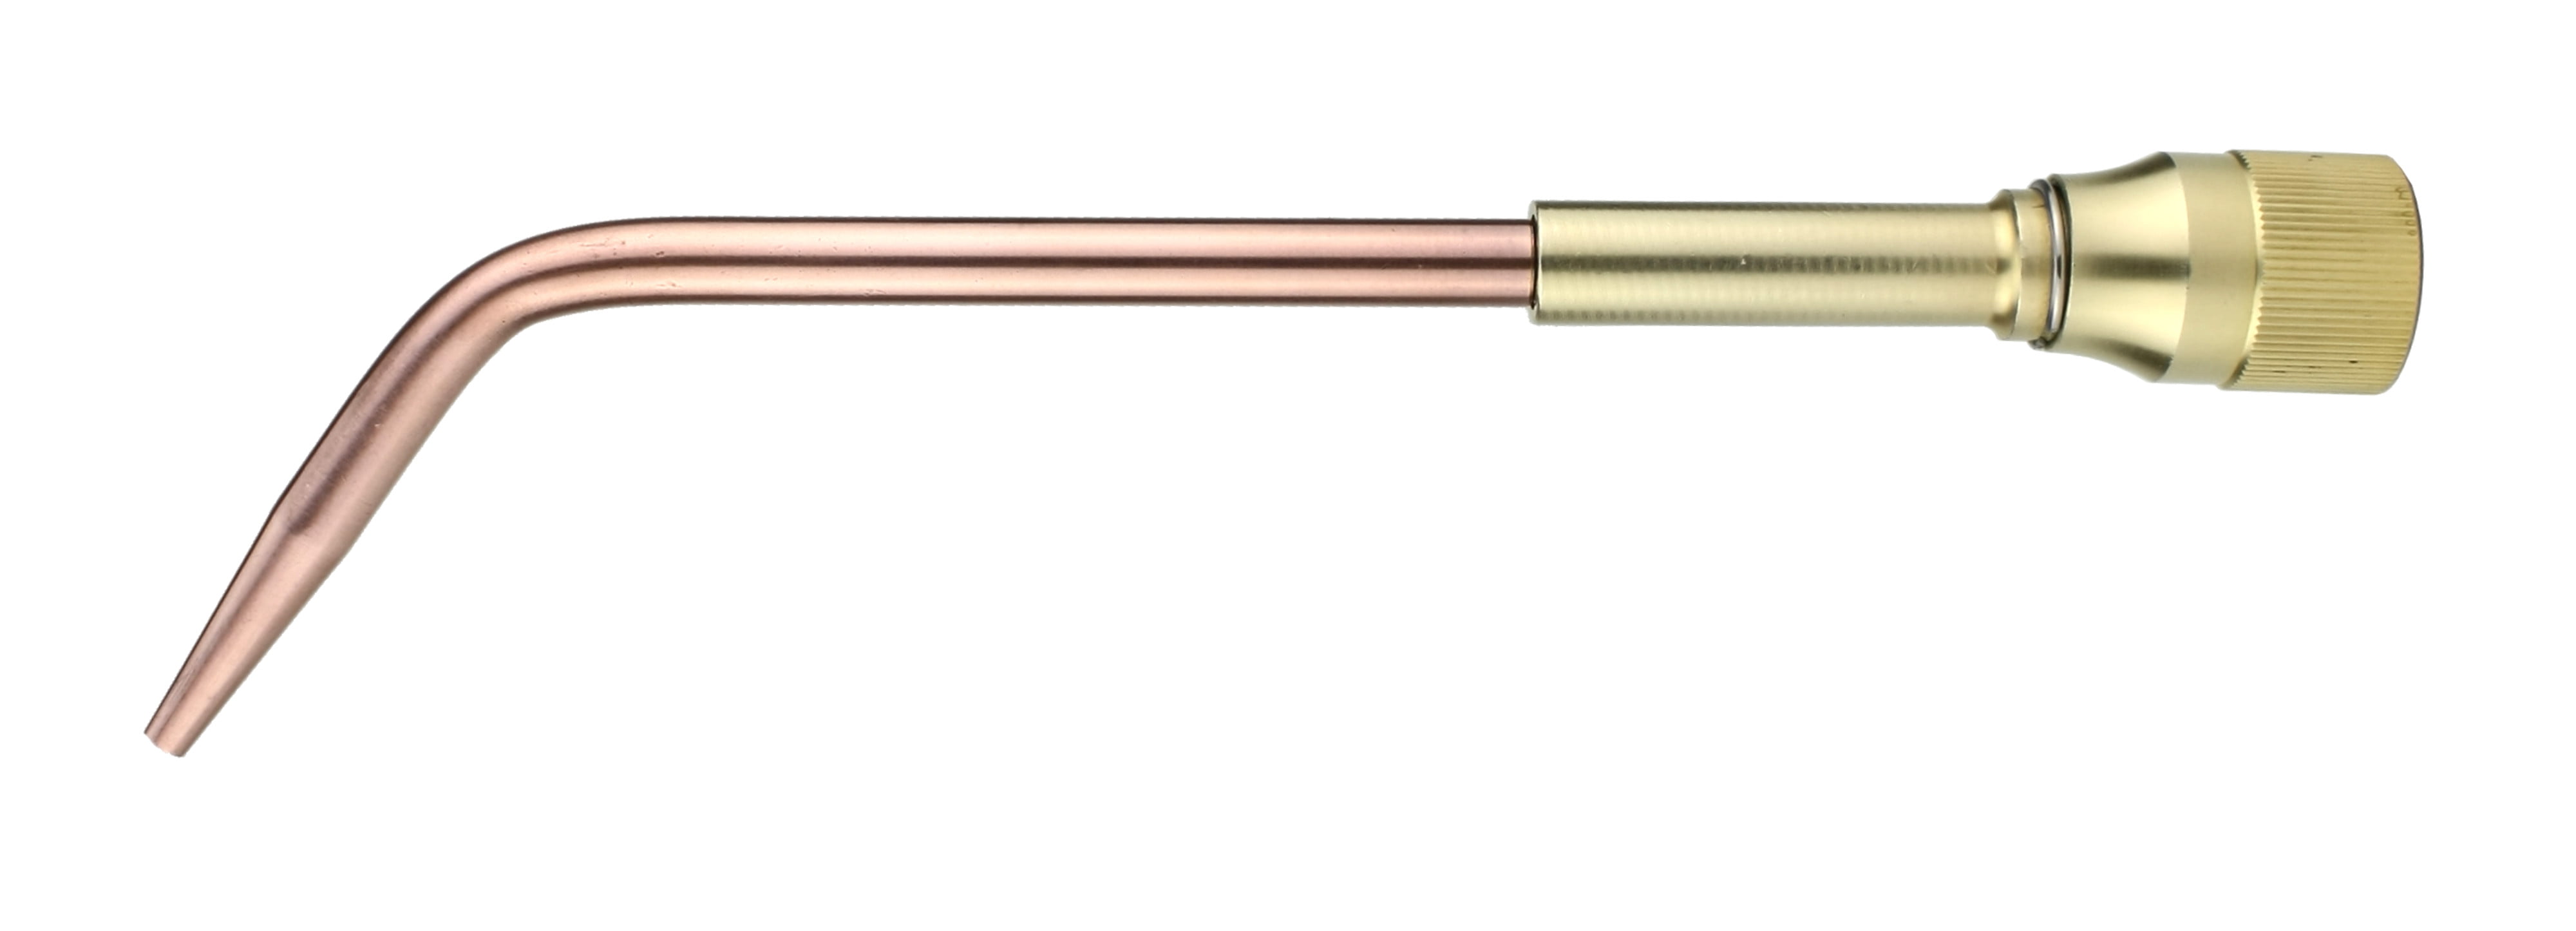 D-85 SÜA Acetylene Welding & Brazing Tip 23A90 Compatible with Harris Torches 5 Size Mixer 